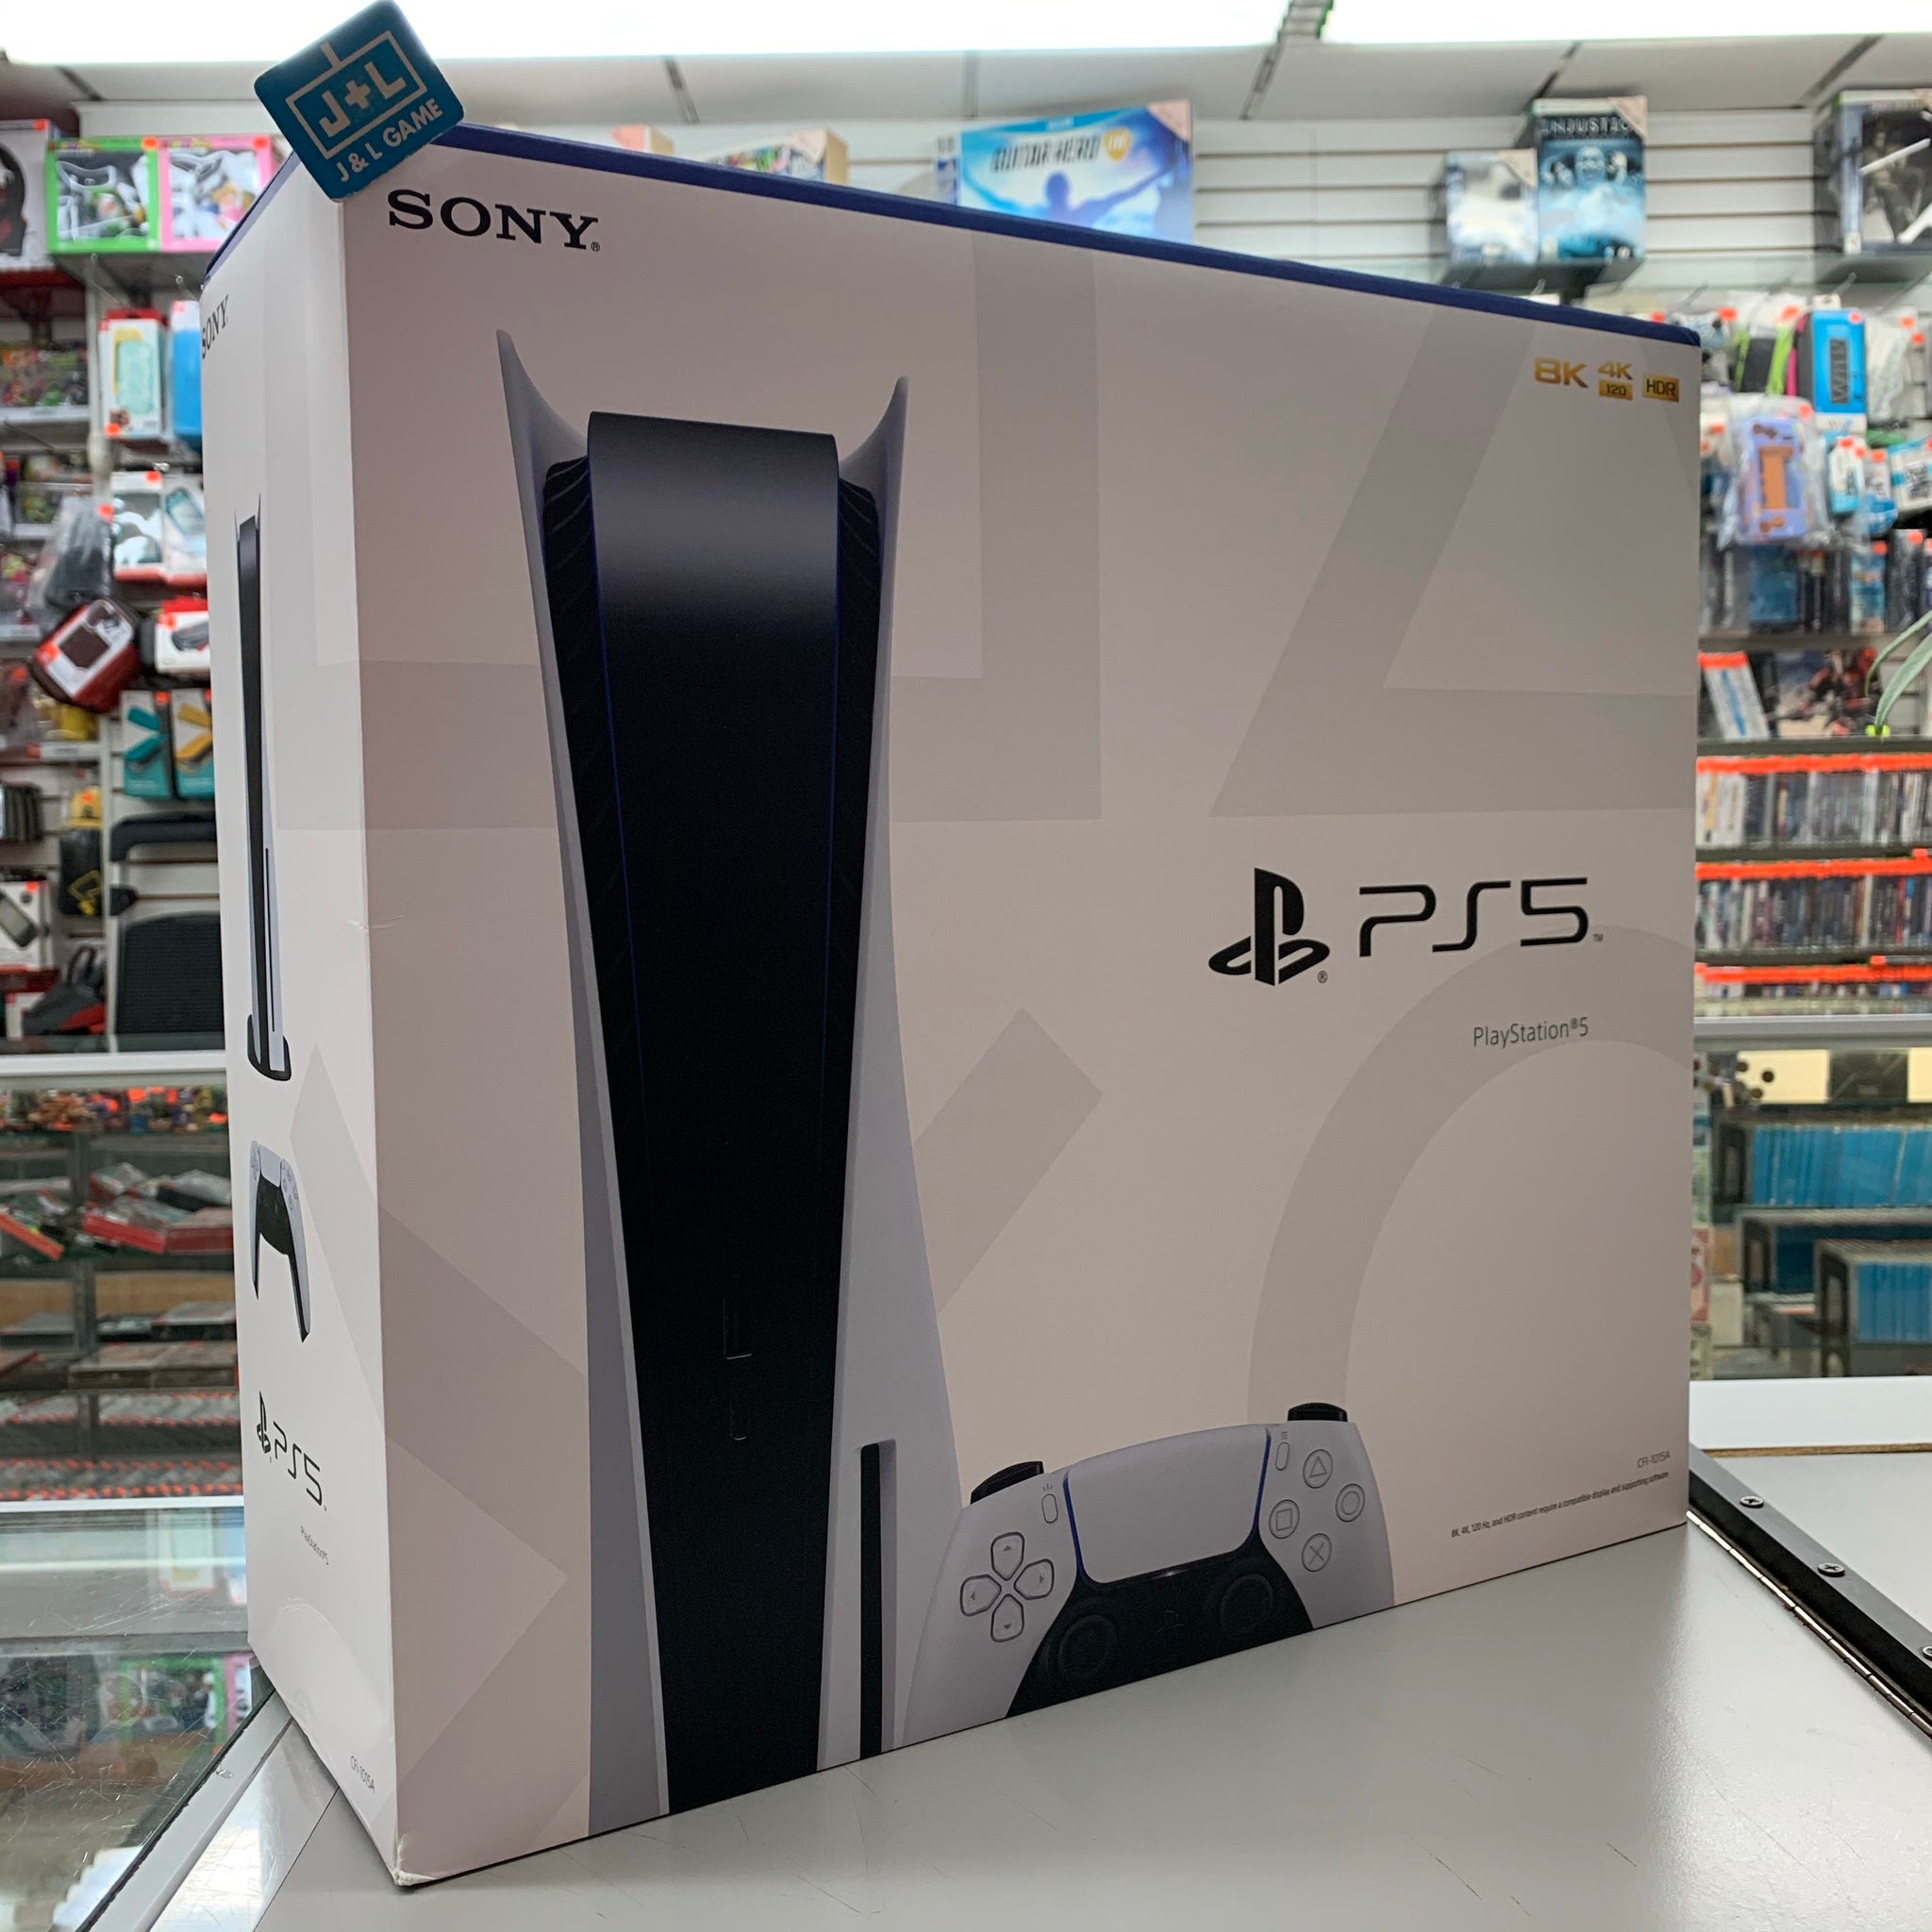 Sony PLAYSTATION 5 Digital Edition UNBOXING & PS5 GIVEAWAY 